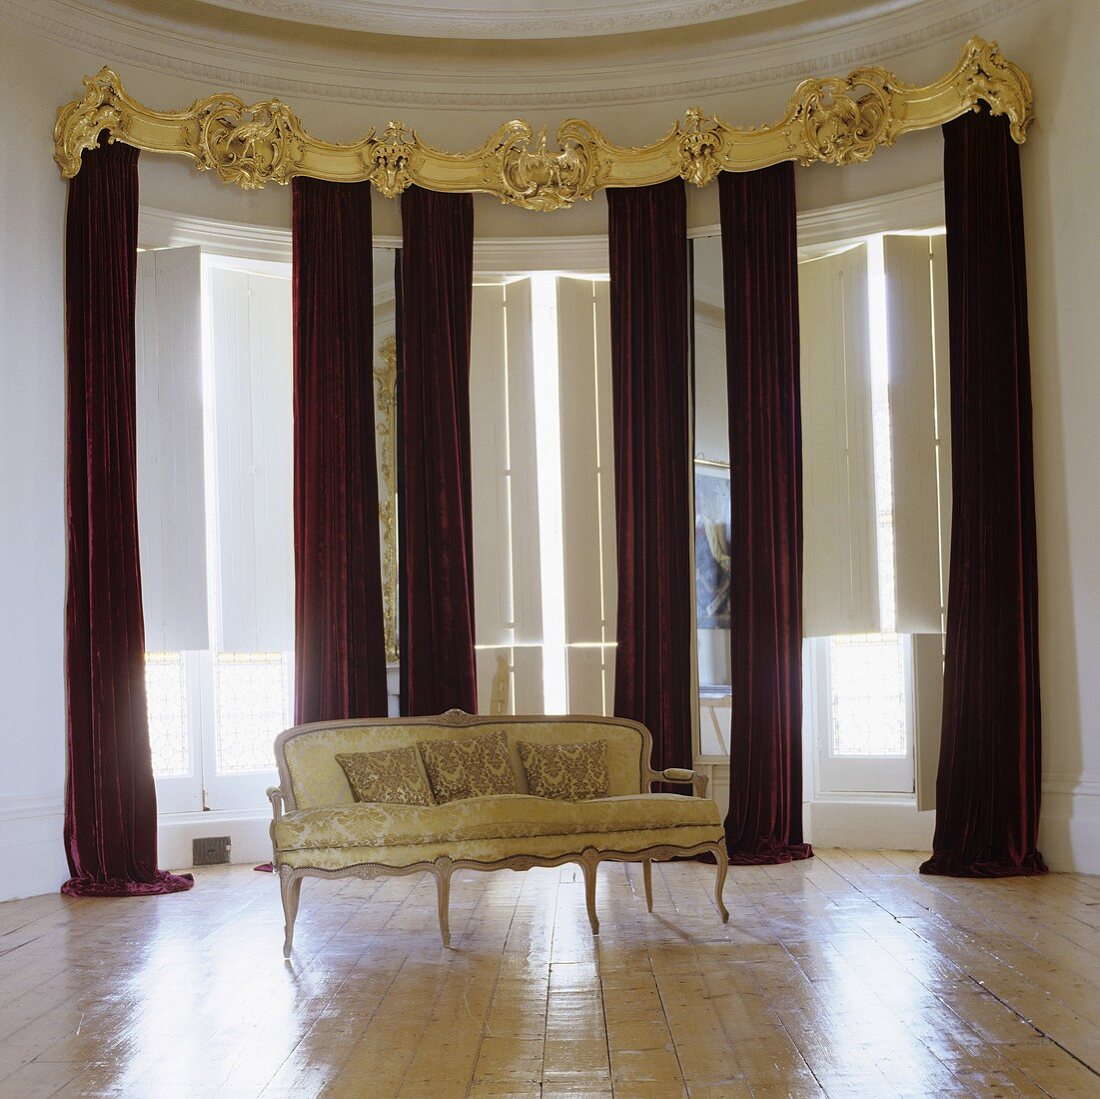 Curtian up - a Rococo bench in a turret with an elegant curtain pelmet